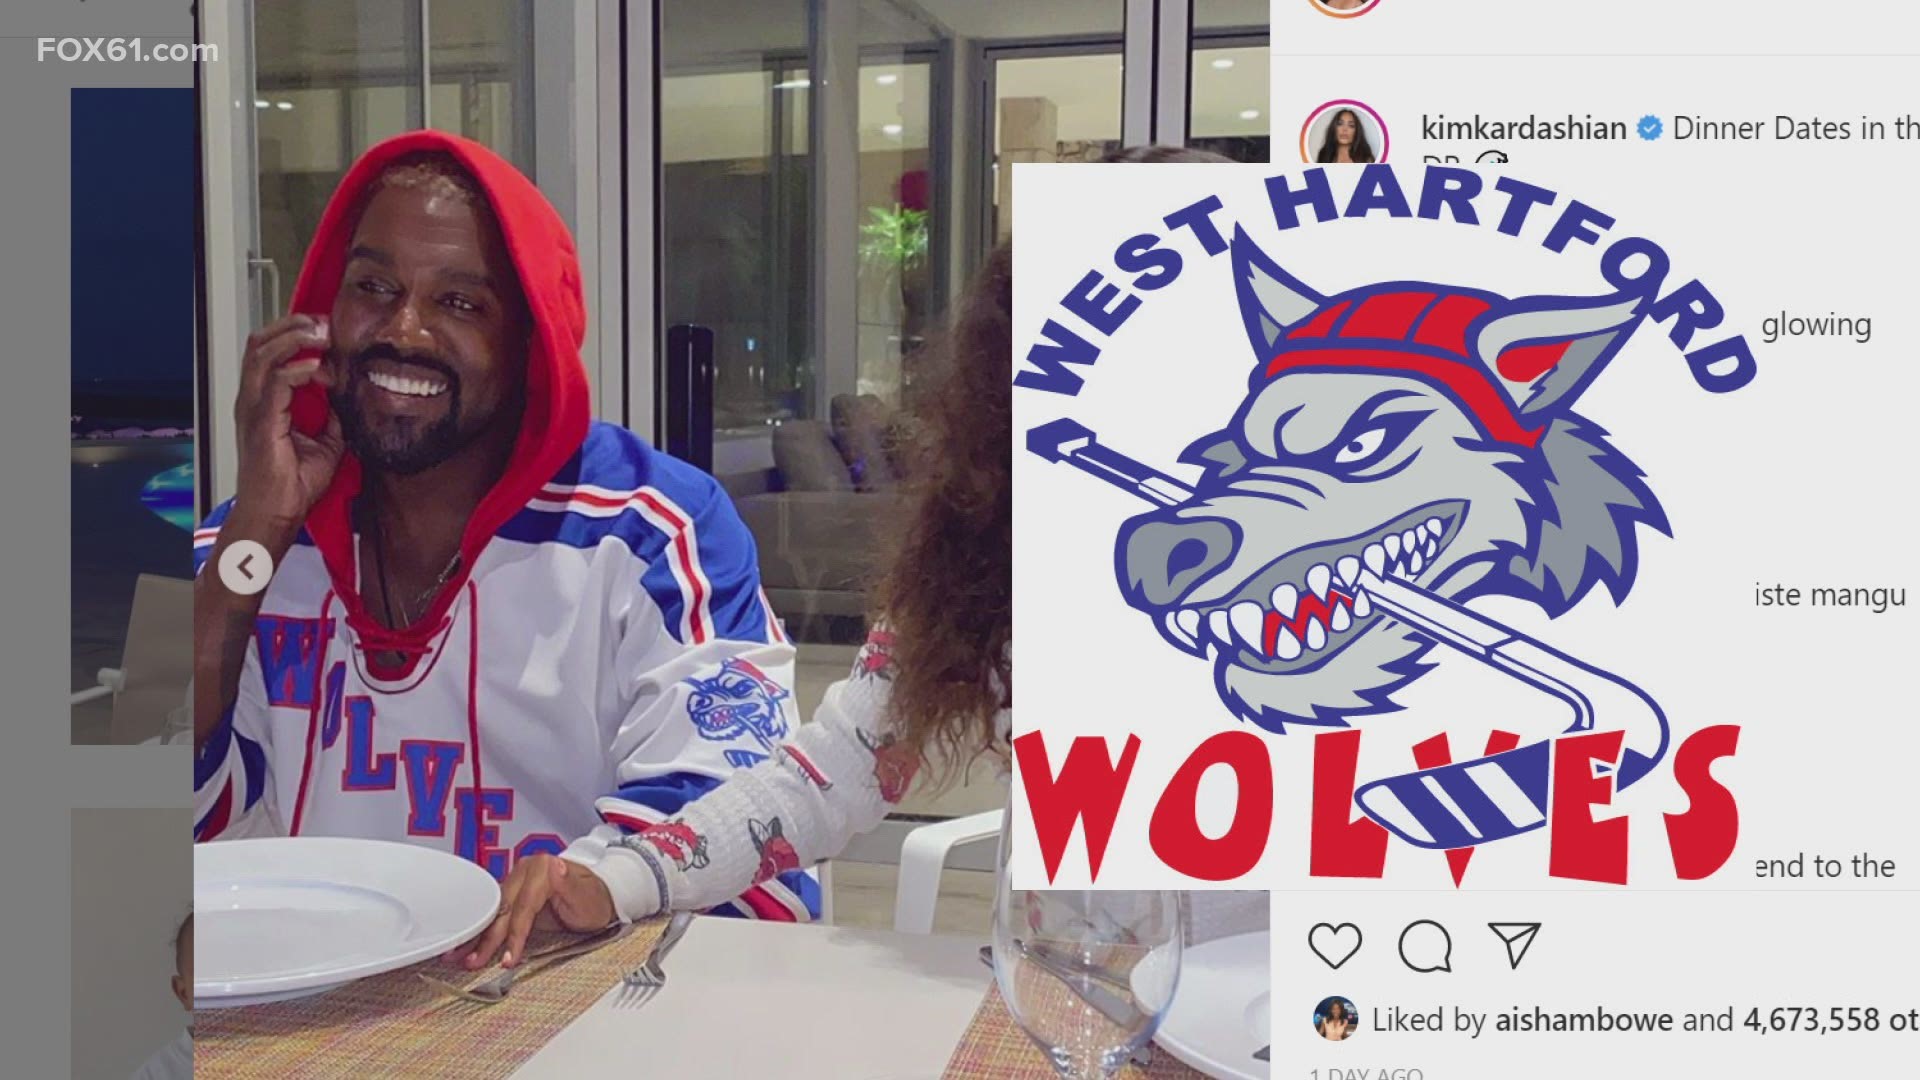 Kanye West was seen wearing a hockey jersey that looks like a West Hartford Wolves youth hockey jersey. it is not clear if it was or not.